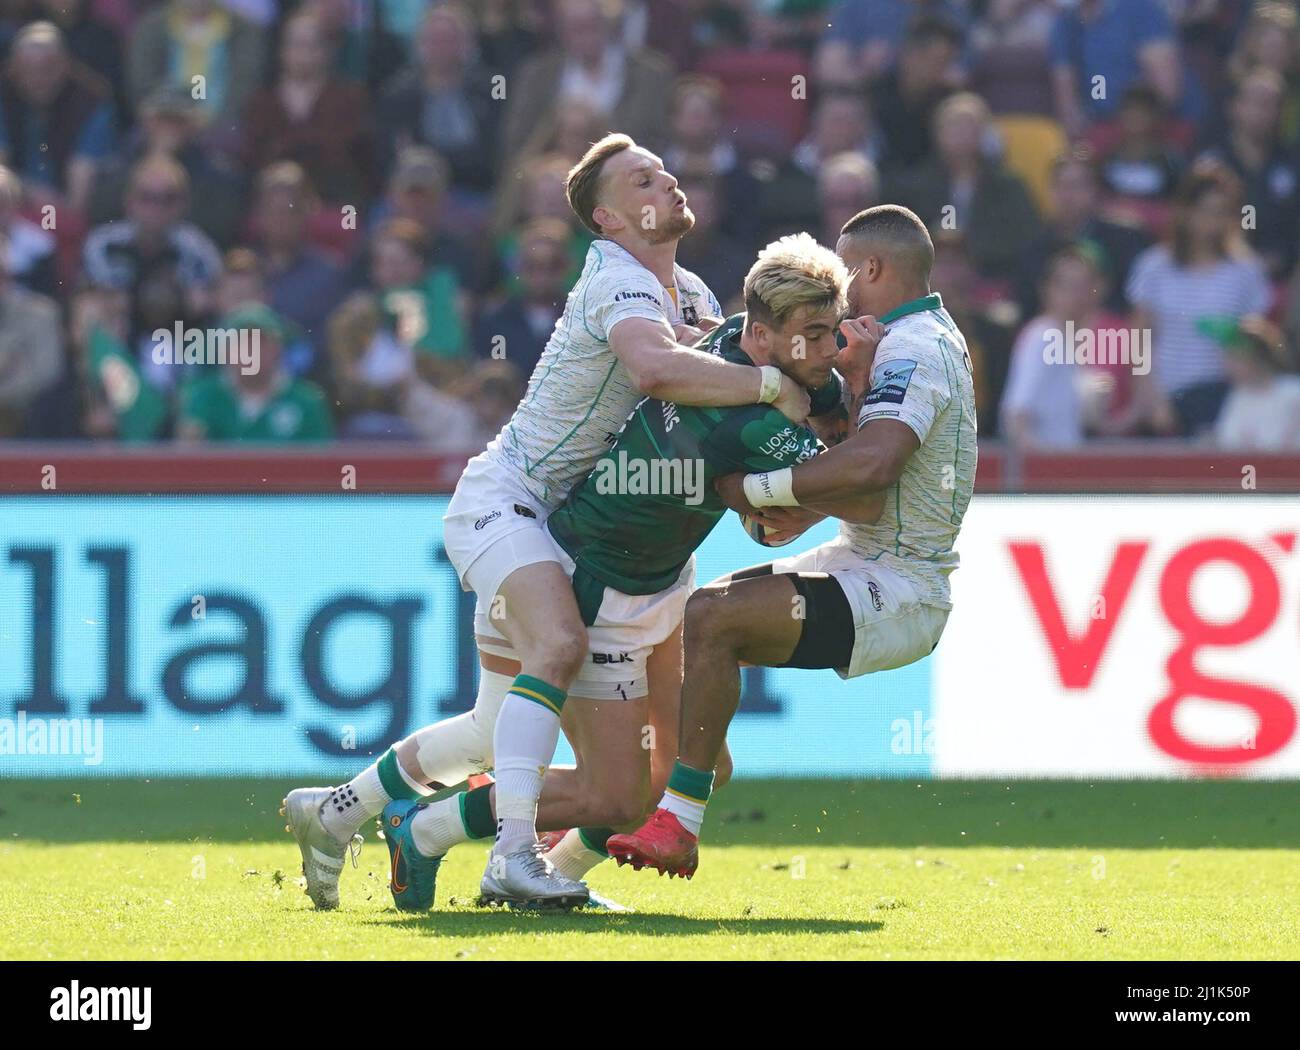 London Irish's Will Goodrick-Clarke (centre) is tackled by Northampton Saints' Rory Hutchinson (left) and Courtnall Skosan (right) during the Gallagher Premiership match at the Brentford Community Stadium, London. Picture date: Saturday March 26, 2022. Stock Photo